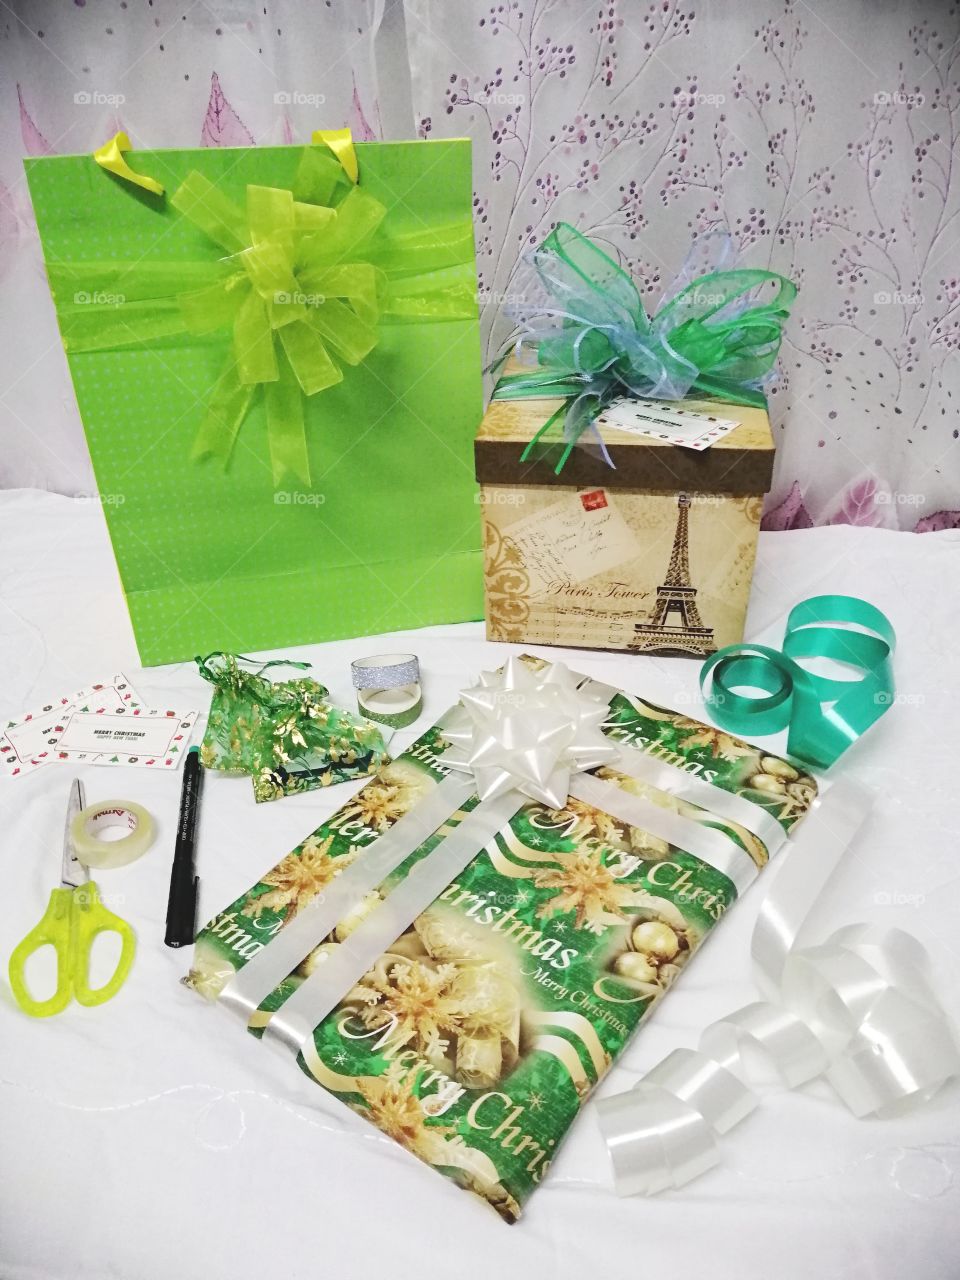 Packing Christmas presents showing some of the materials used. A green paper gift bag with green bow, a box with blue and green bow, and a present wrapped in a gift wrapper with Merry Christmas design and white ribbon.